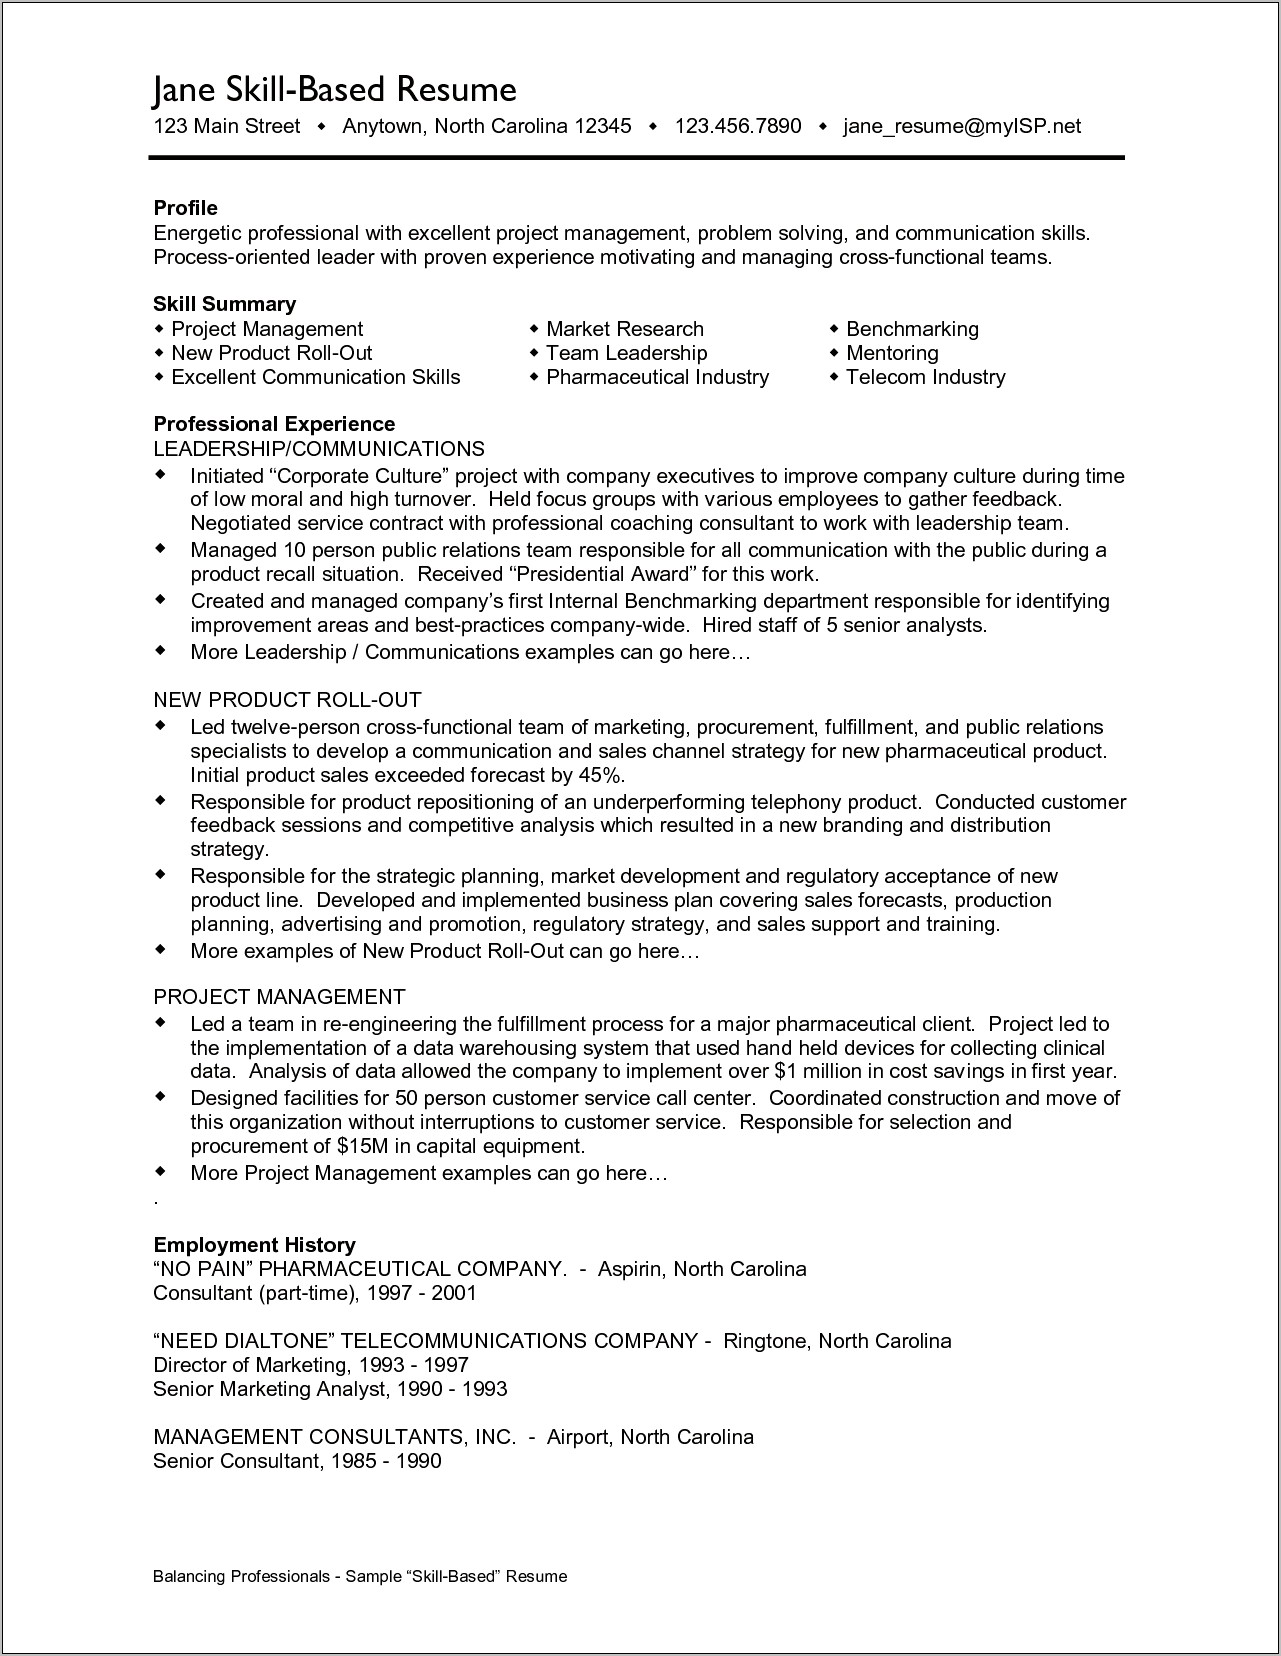 Examples Of Job Skills On A Resume